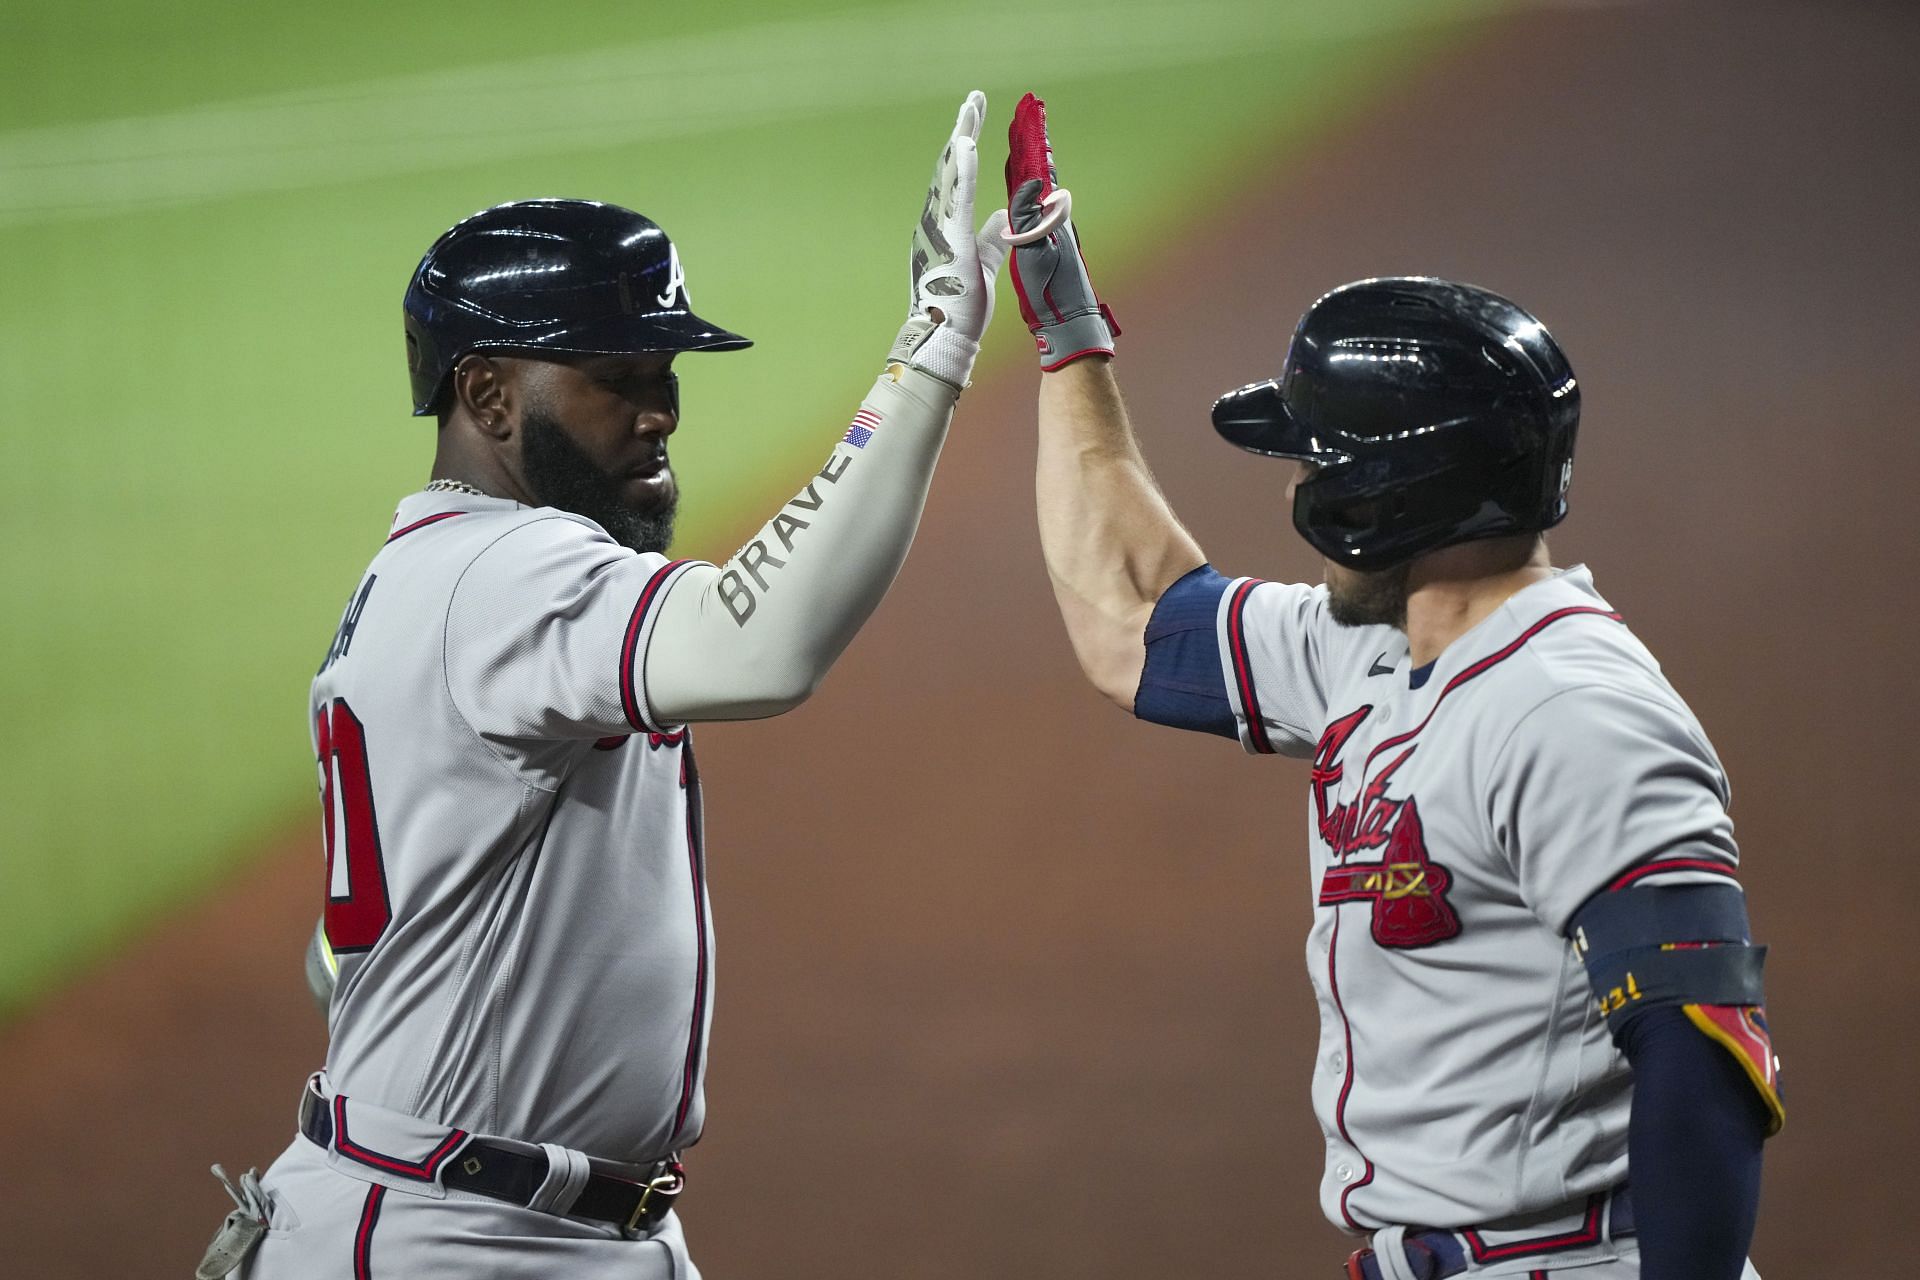 The 17-21 Atlanta Braves are looking to get rolling this weekend against the 17-20 Miami Marlins